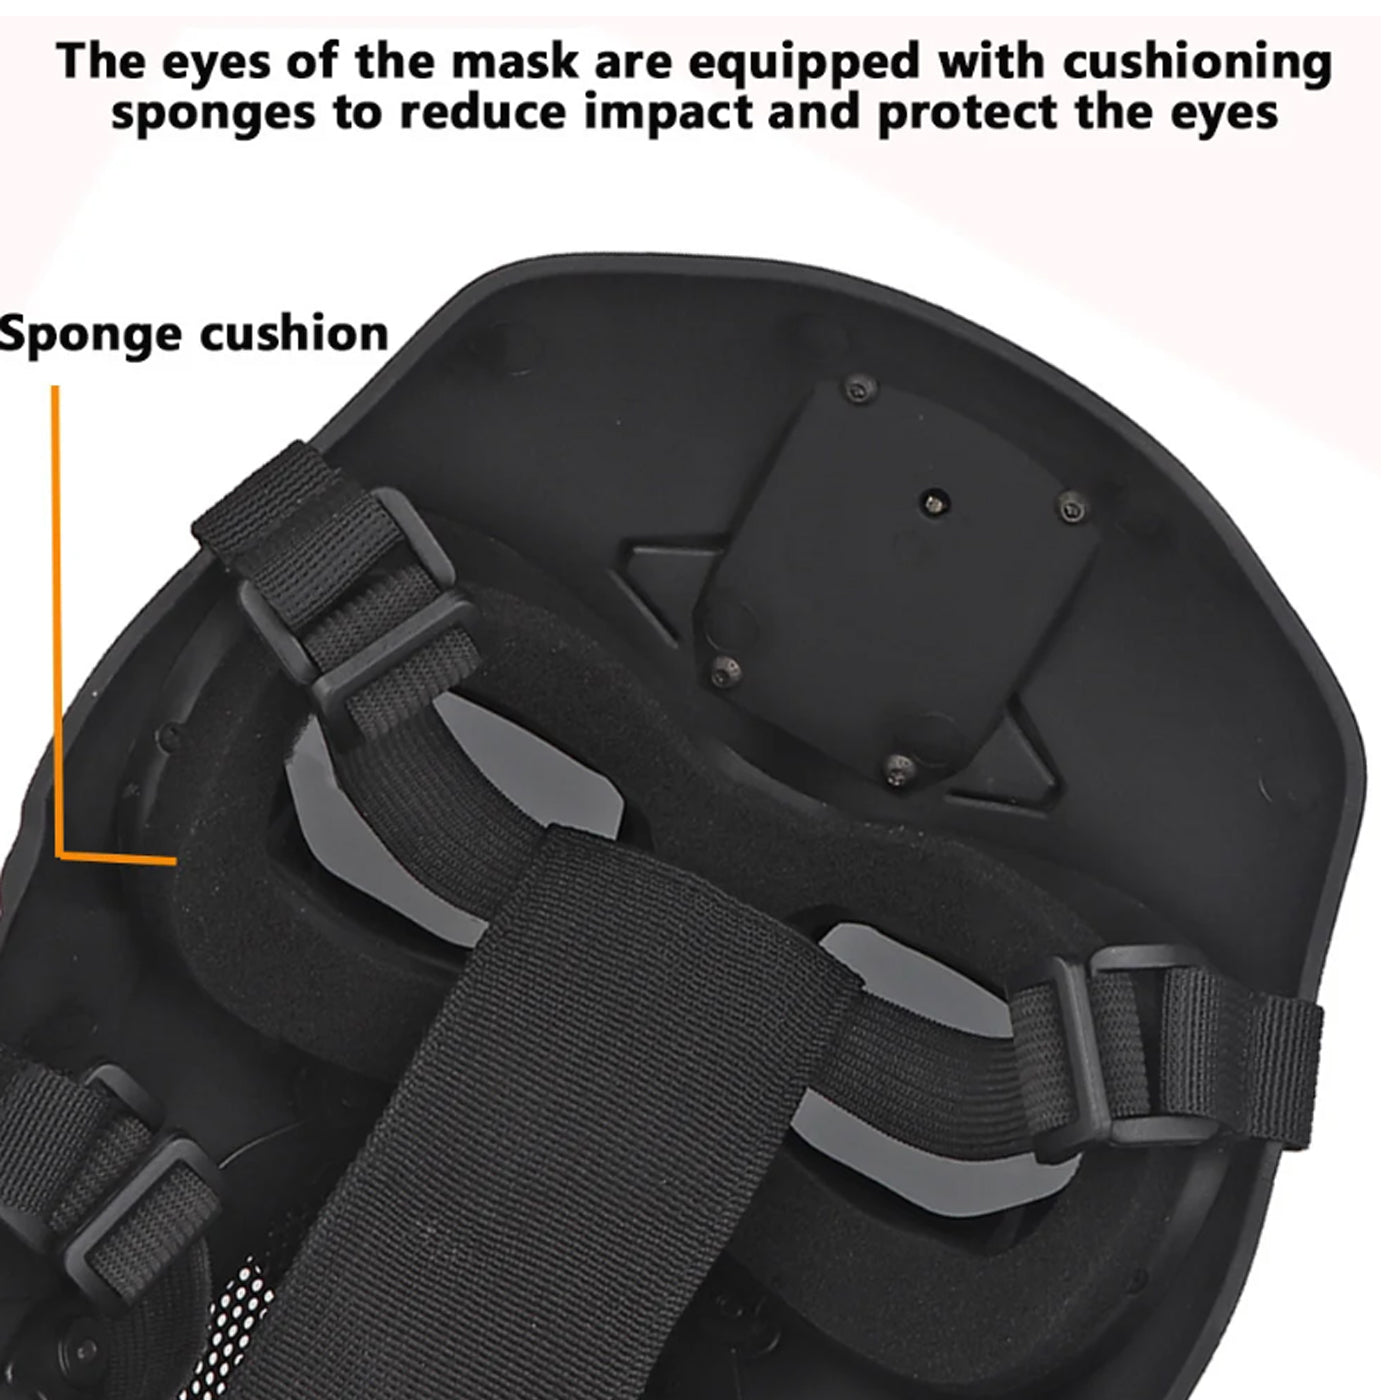 WOSPORT TACTICAL FULL-FACE MASK WITH NIGHT HEADGEAR BLACK FOR AIRSOFT